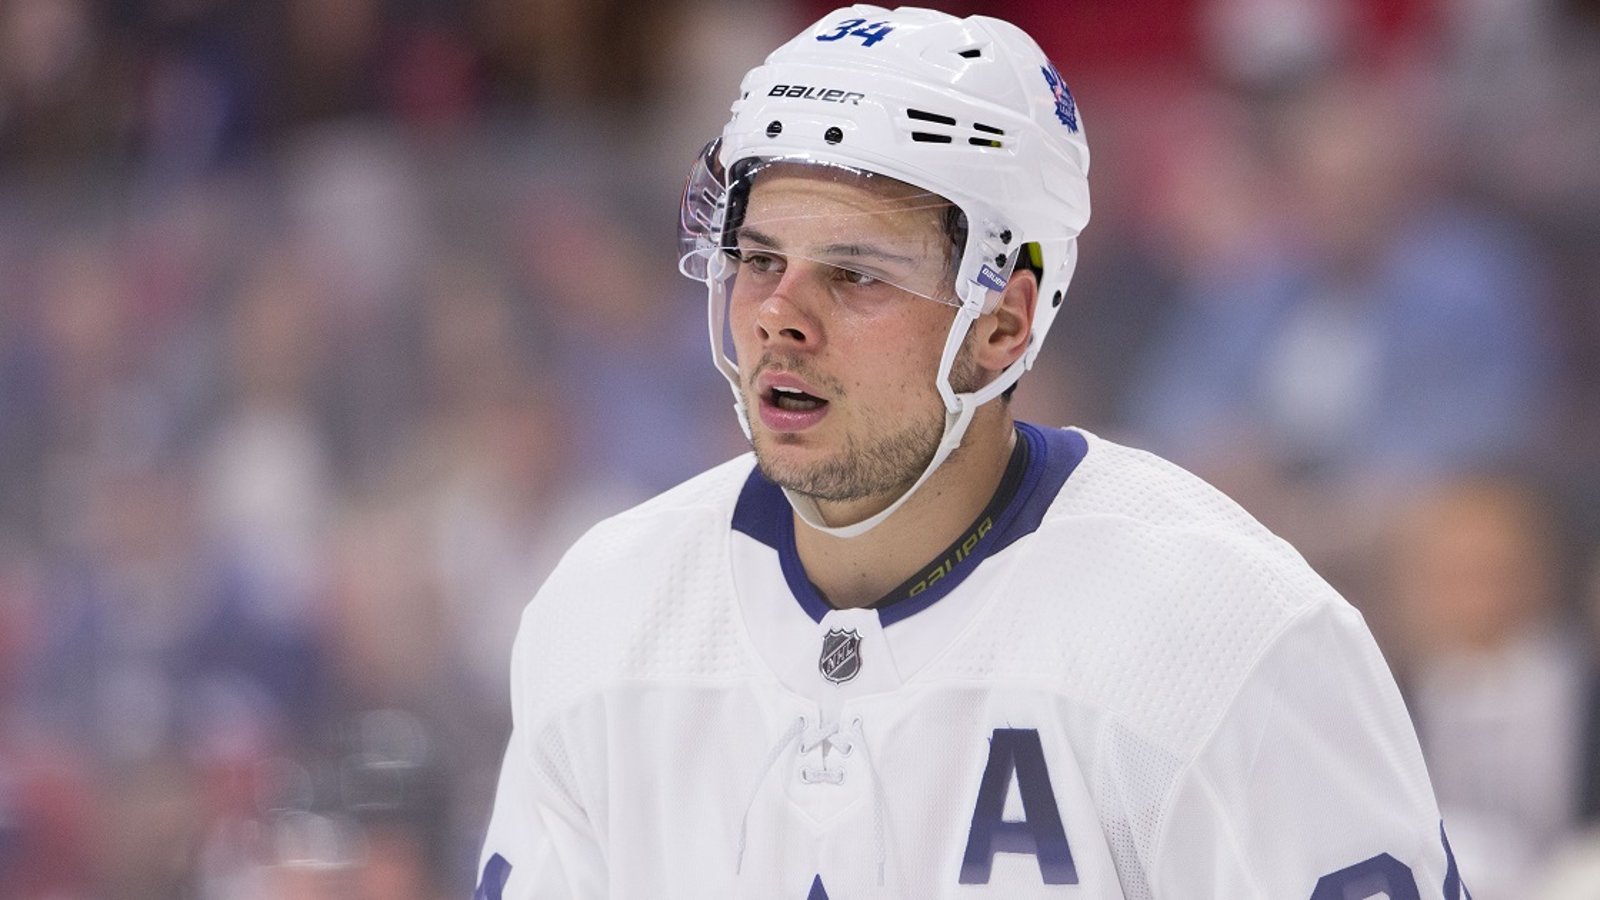 Friedman's update on Matthews is a mix of good and bad news.